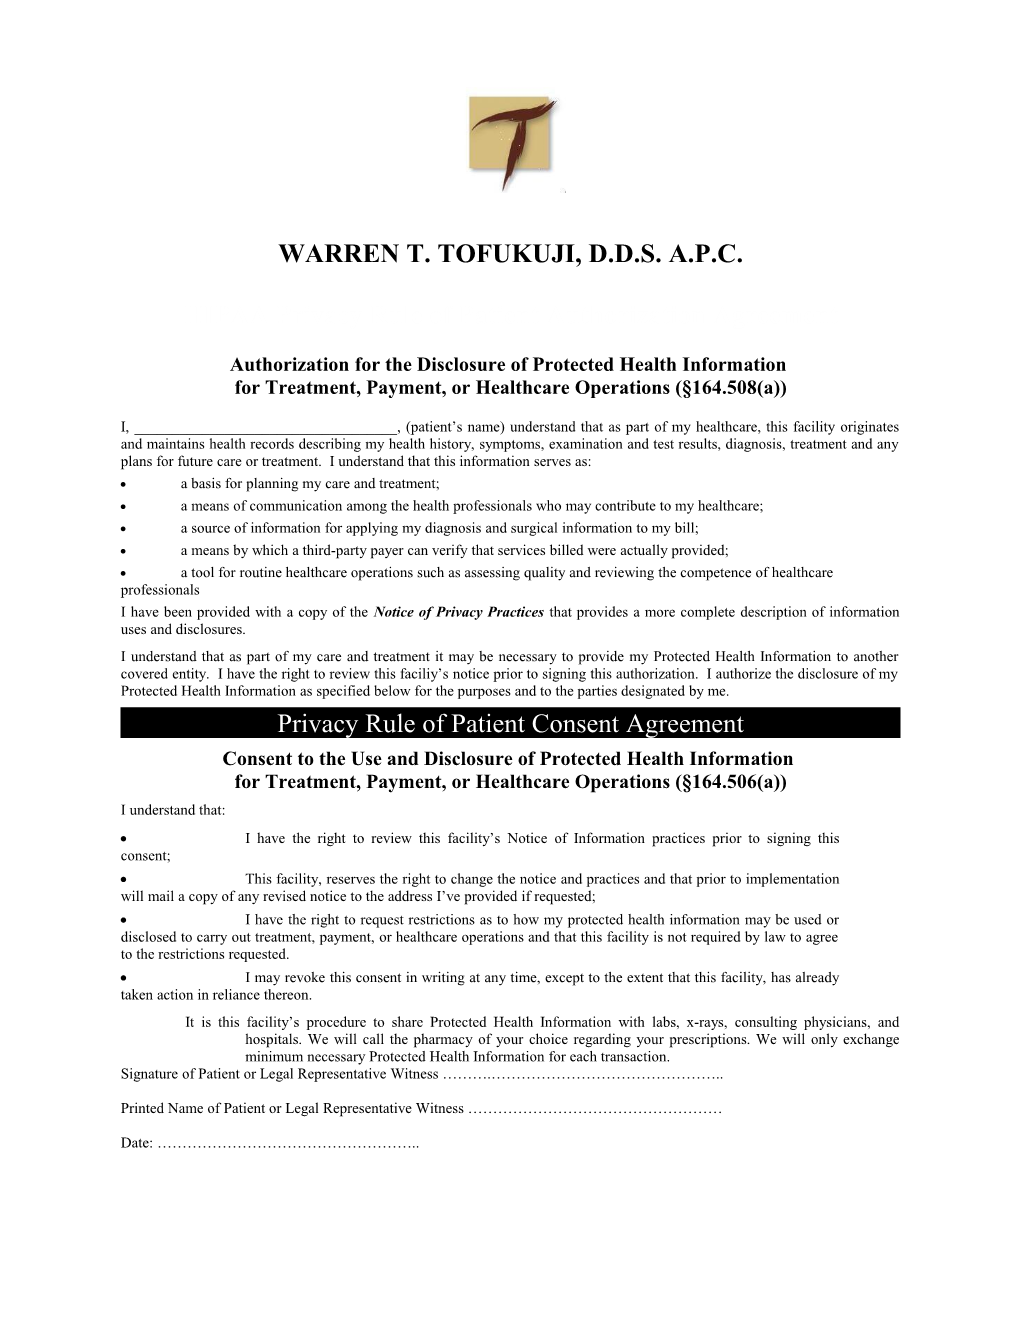 HIPAA Privacy Rule of Patient Authorization Agreement